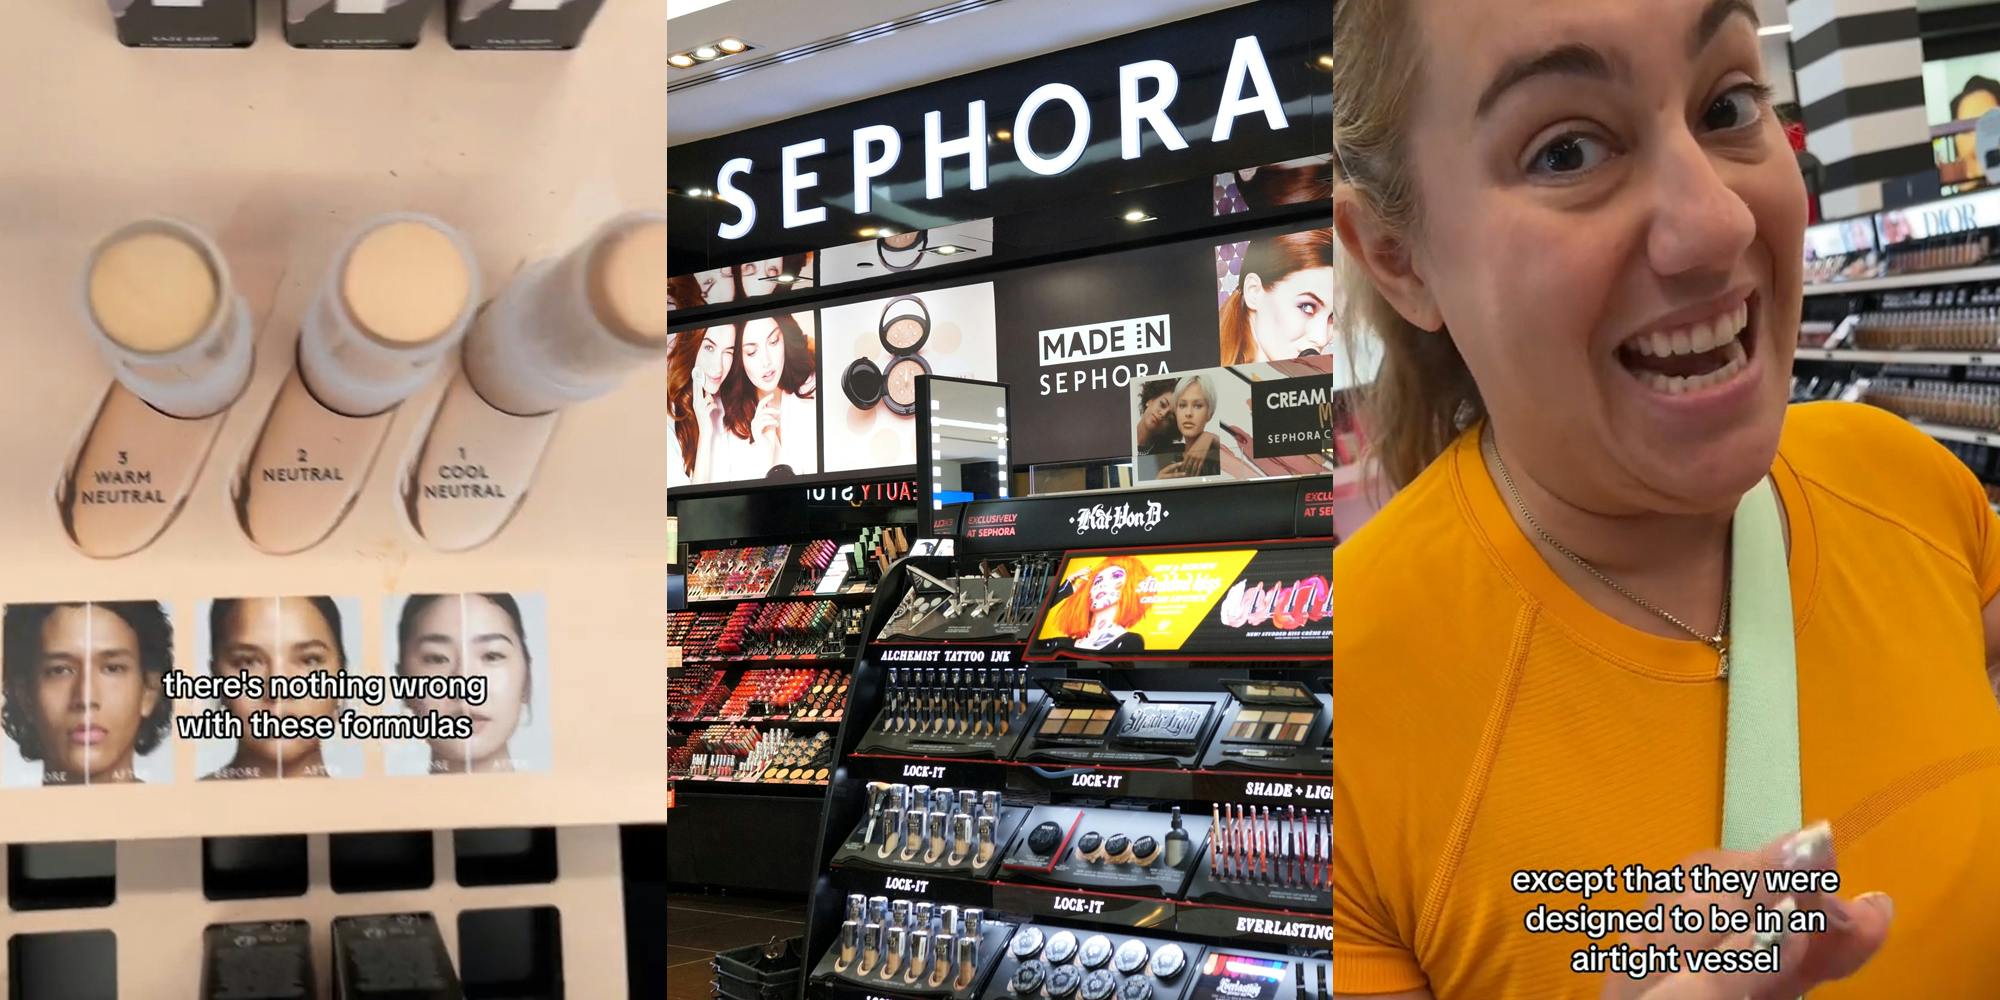 Top-Rated Fenty Beauty Products at Sephora